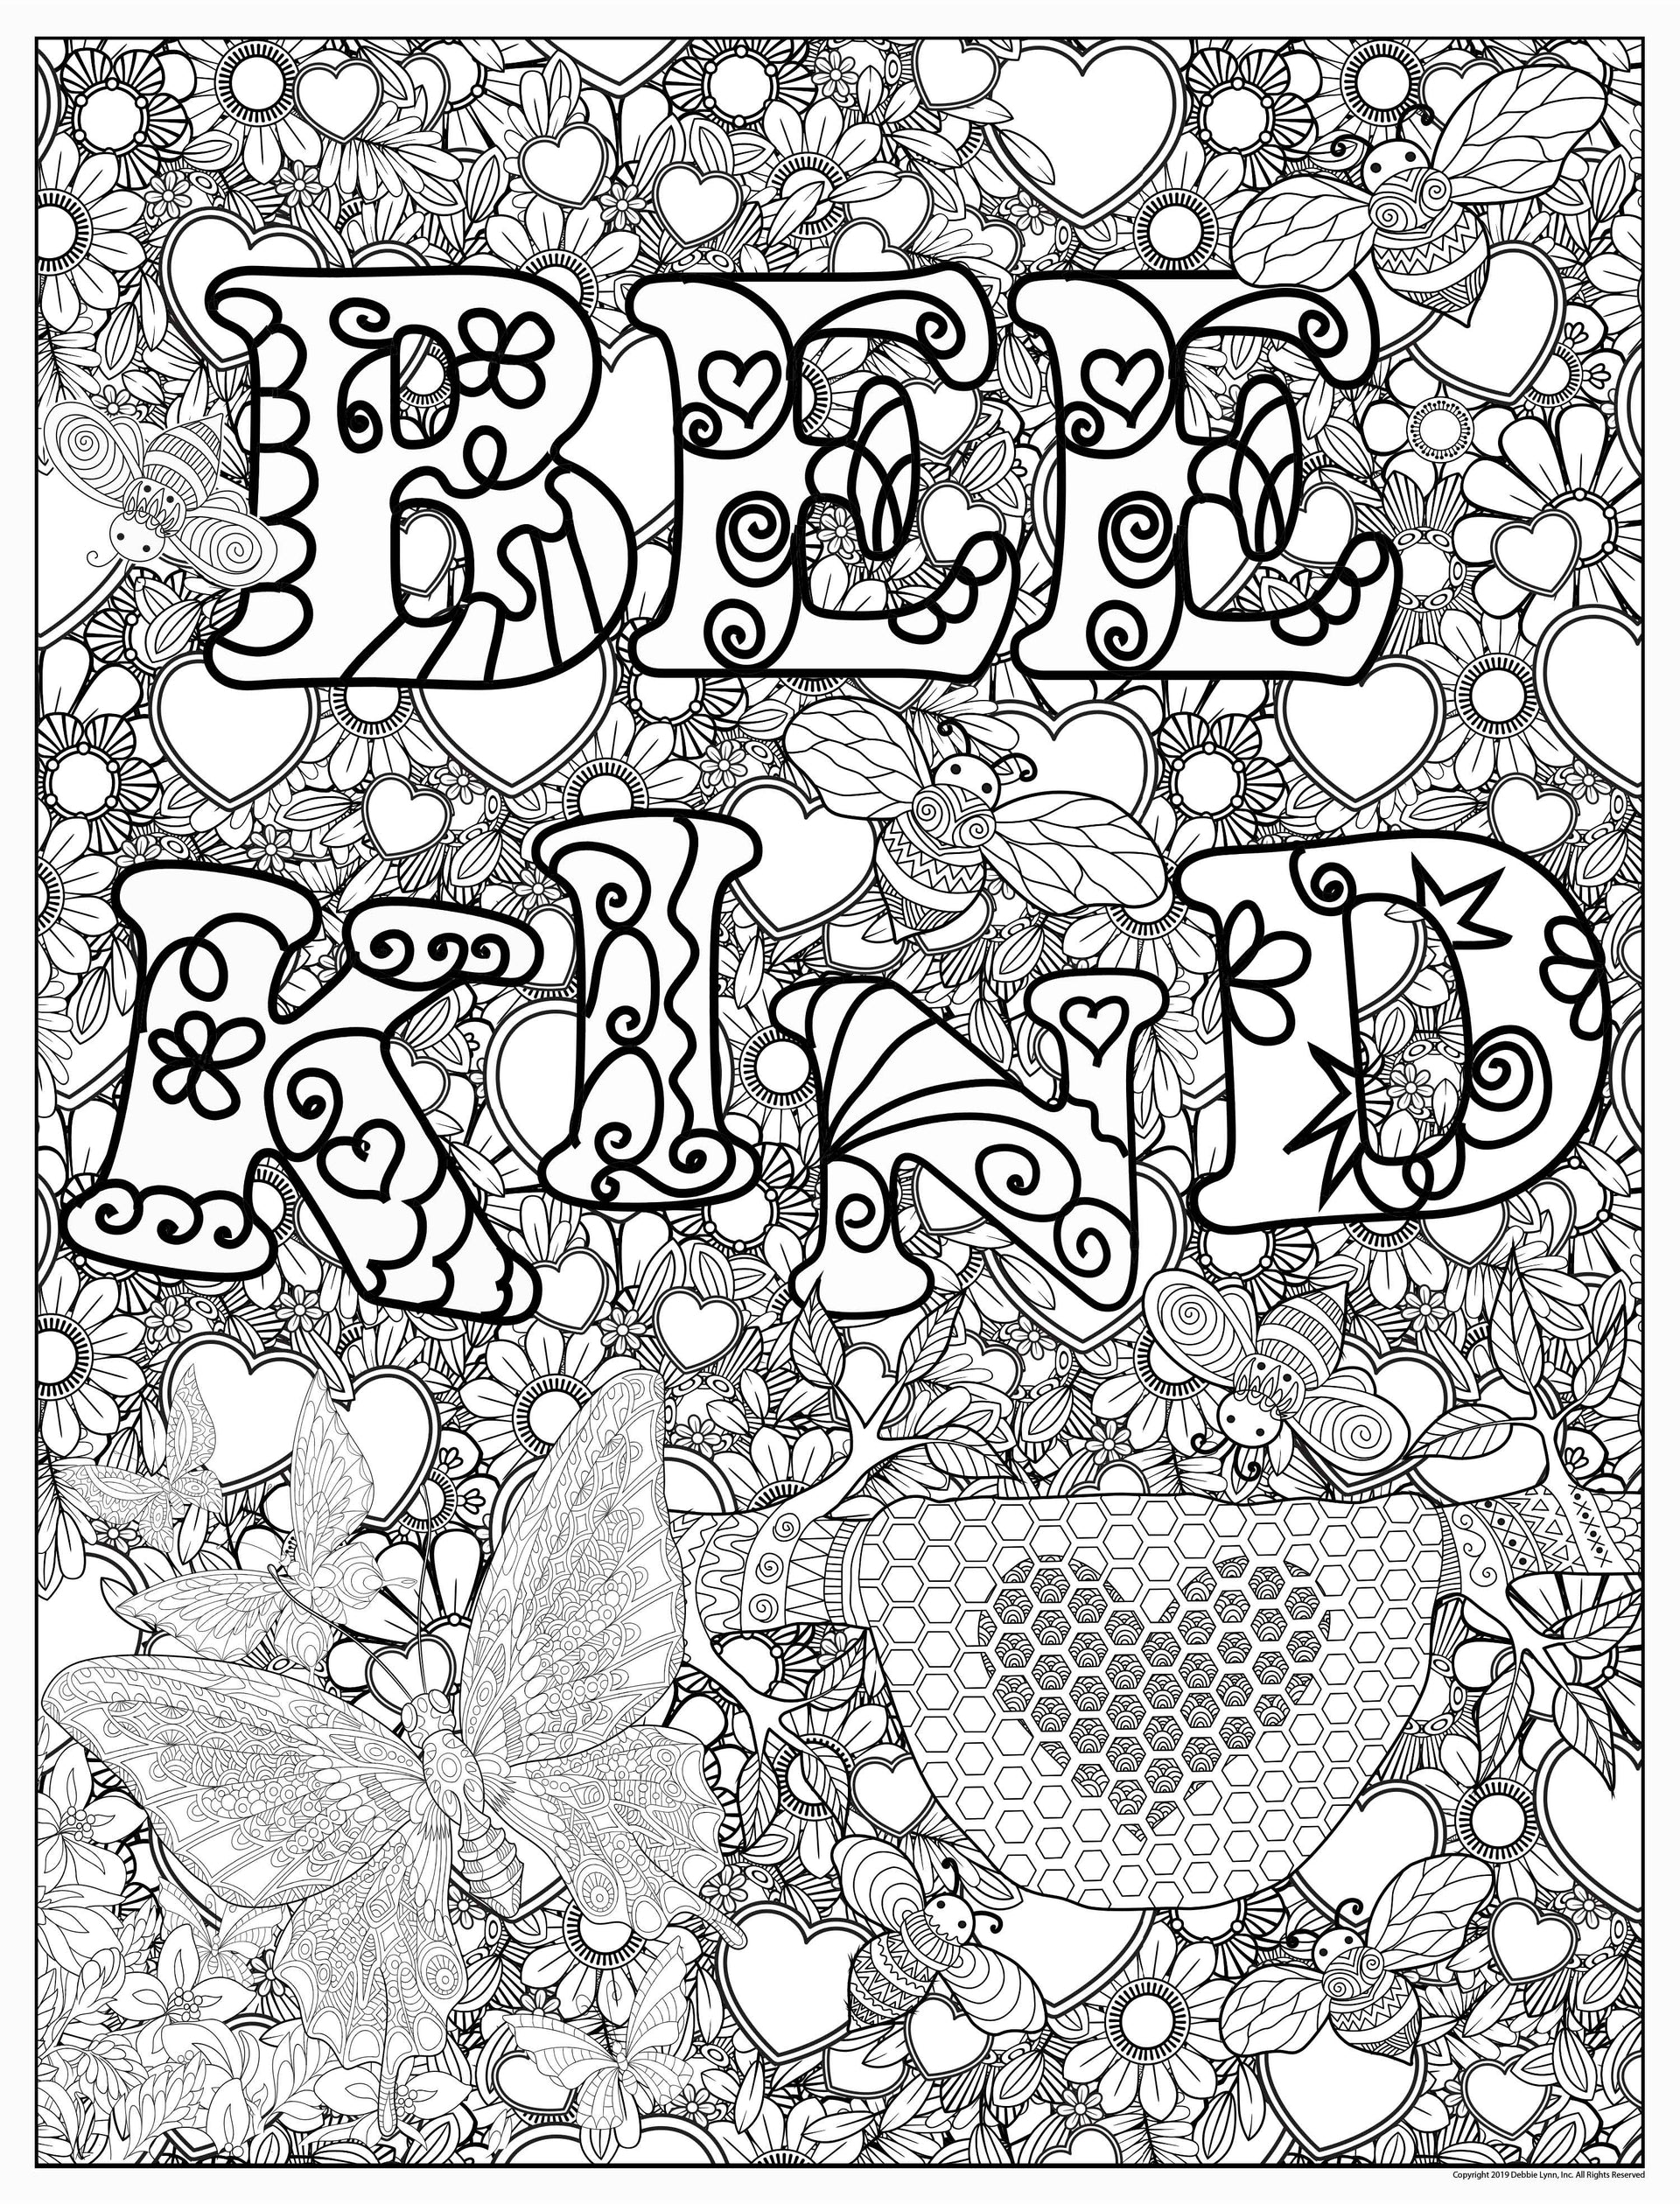 Kindness Coloring Poster, Huge Coloring Poster, Landscape Coloring Poster,  Kindness 